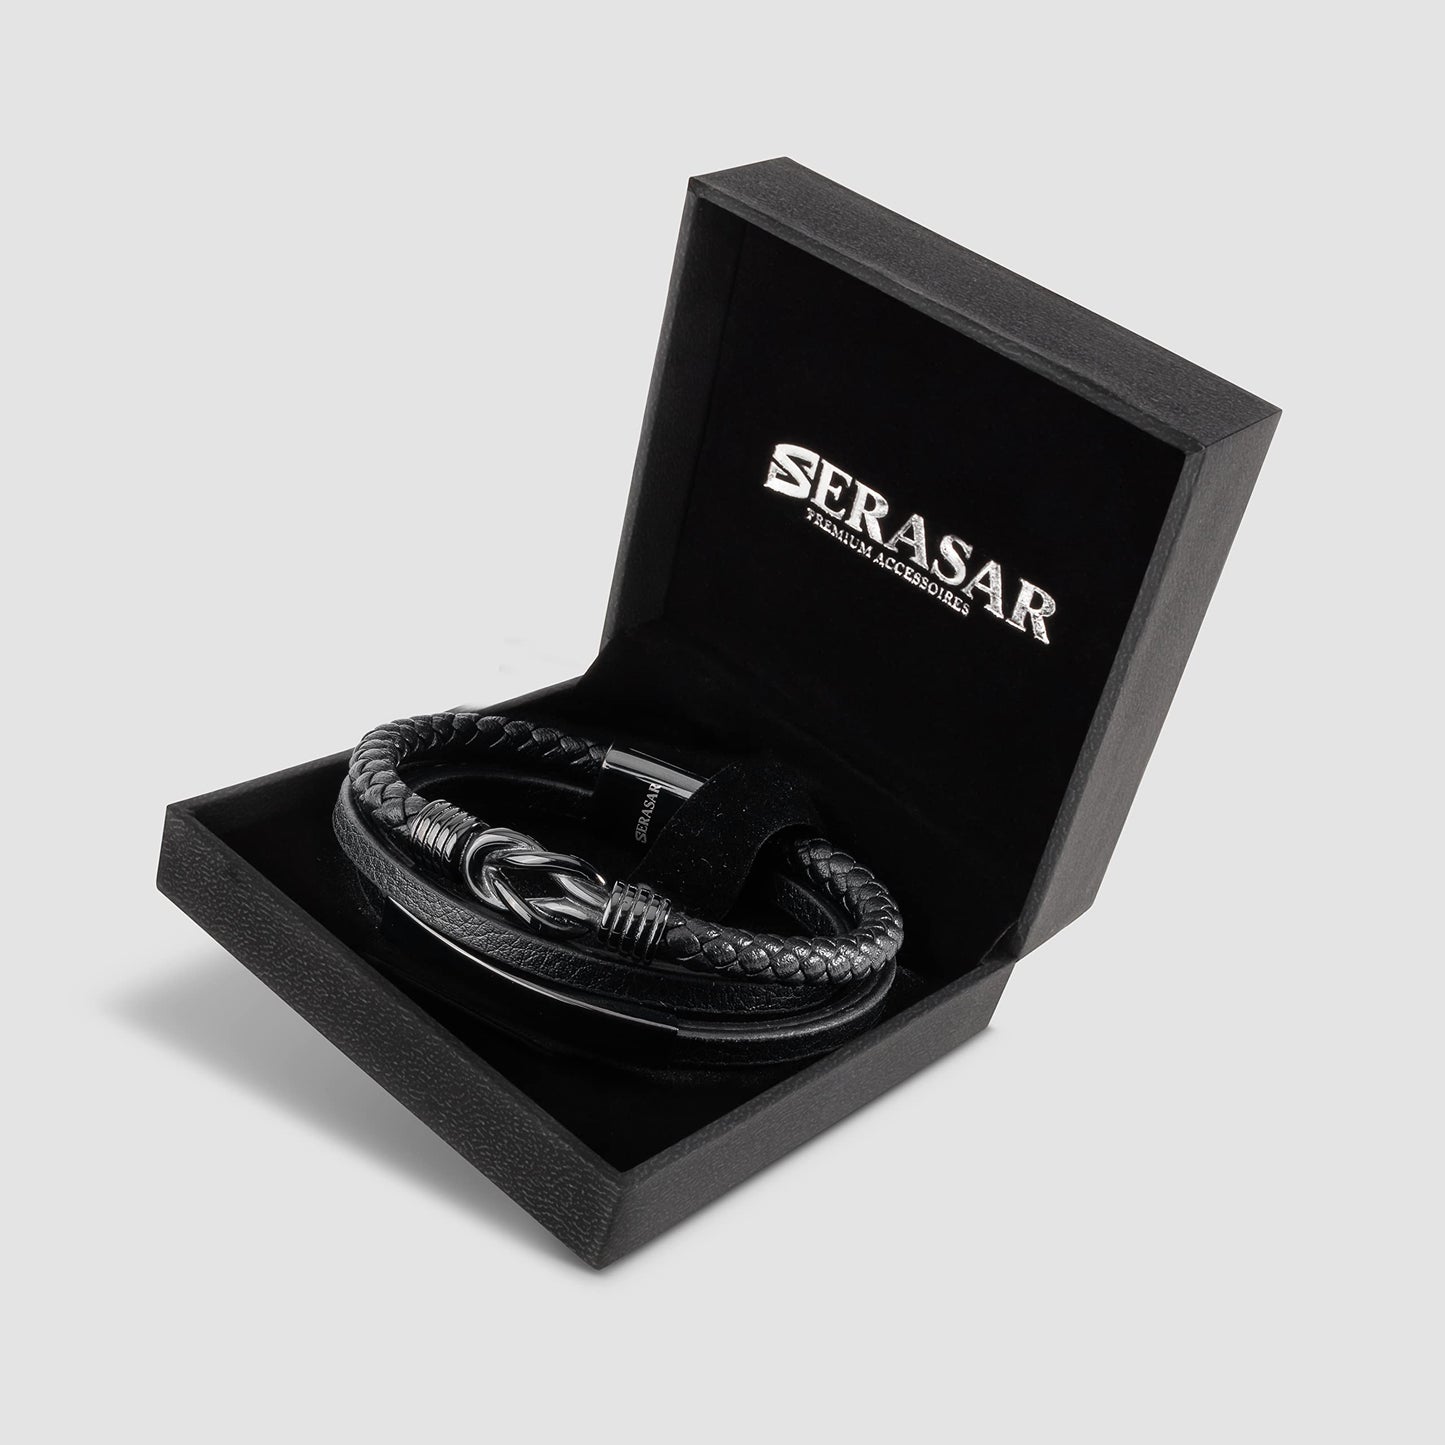 SERASAR | Premium Bracelet [Proud] for Men in Genuine Black Leather | Magnetic Stainless Steel Clasp in Black, Silver and Gold | Exclusive Jewellery Box | Great Gift Idea